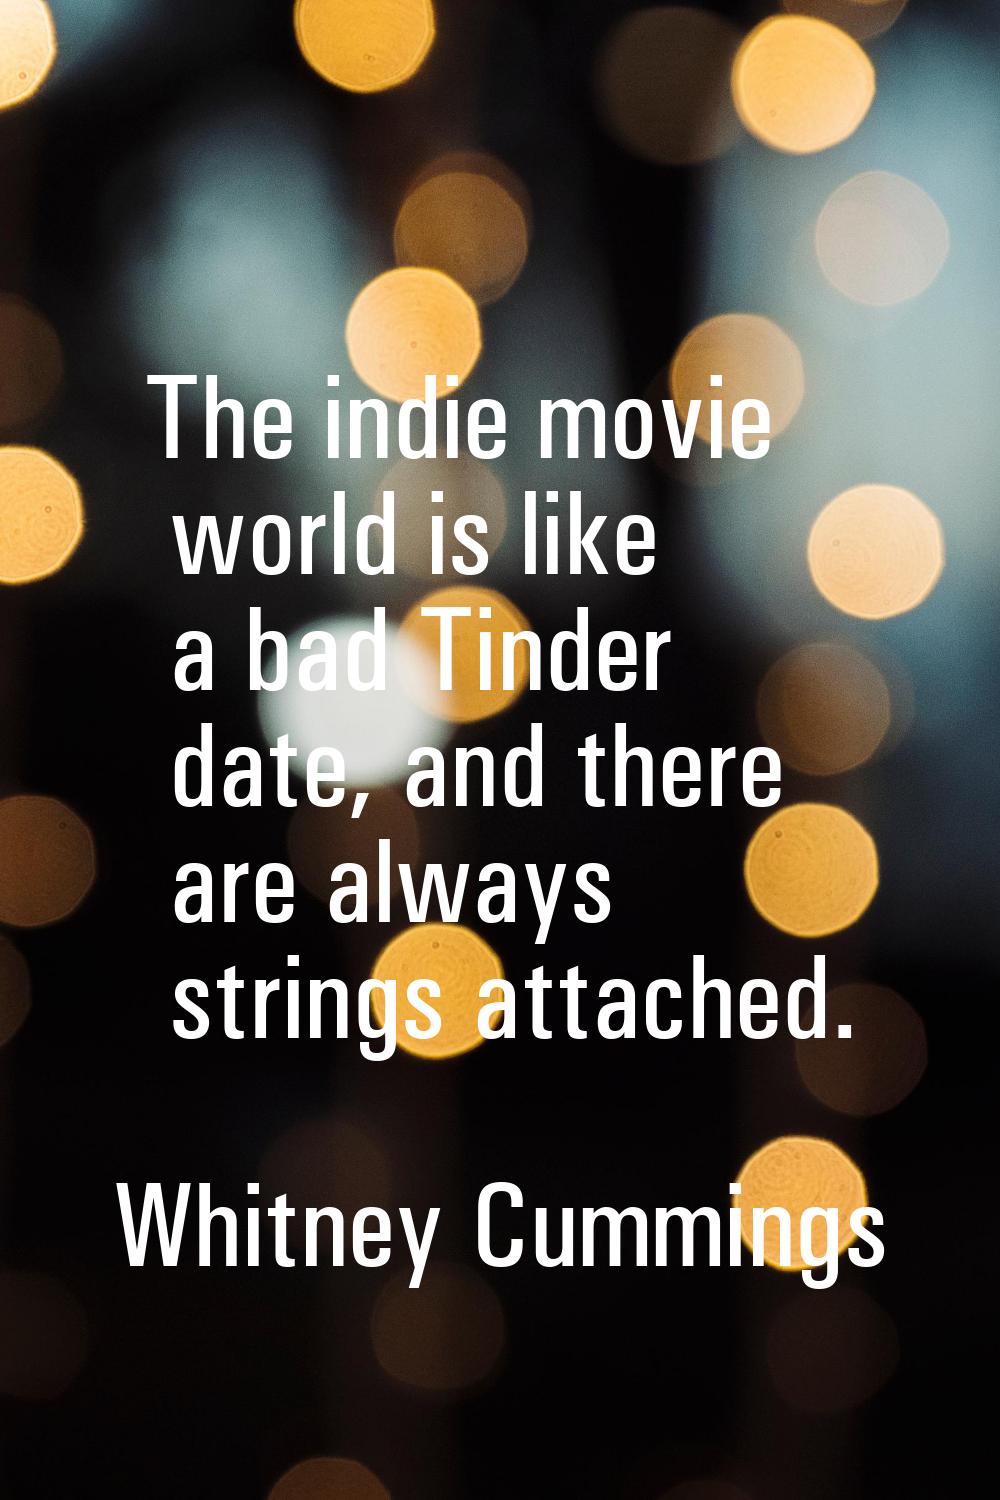 The indie movie world is like a bad Tinder date, and there are always strings attached.